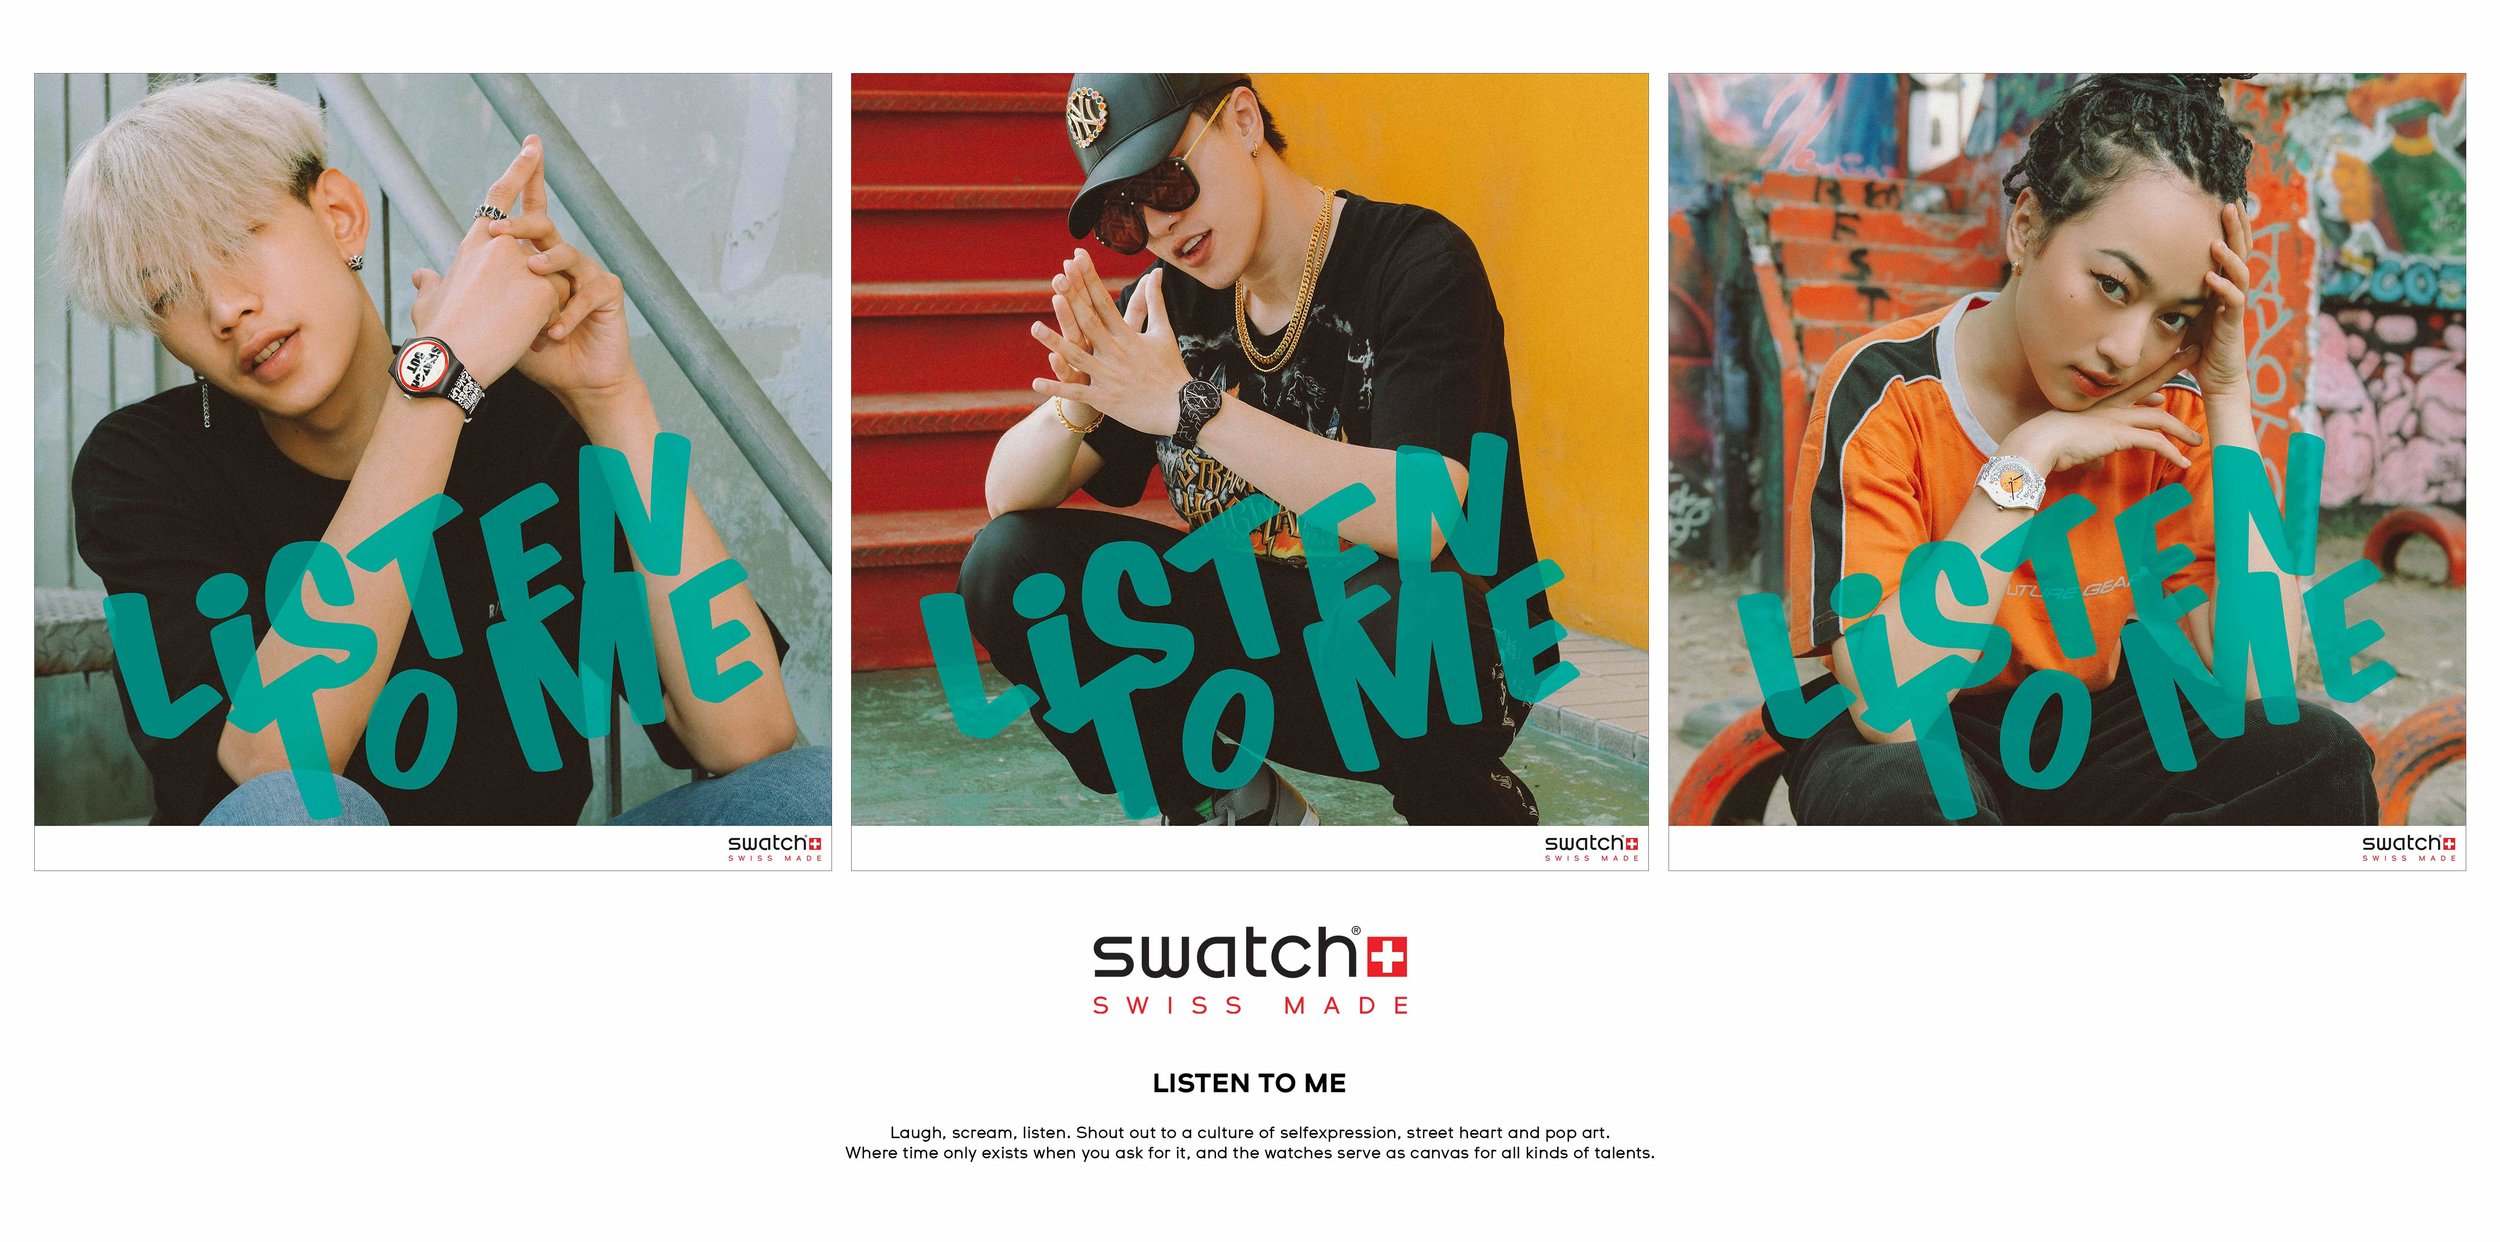 Swatch 'Listen to me'